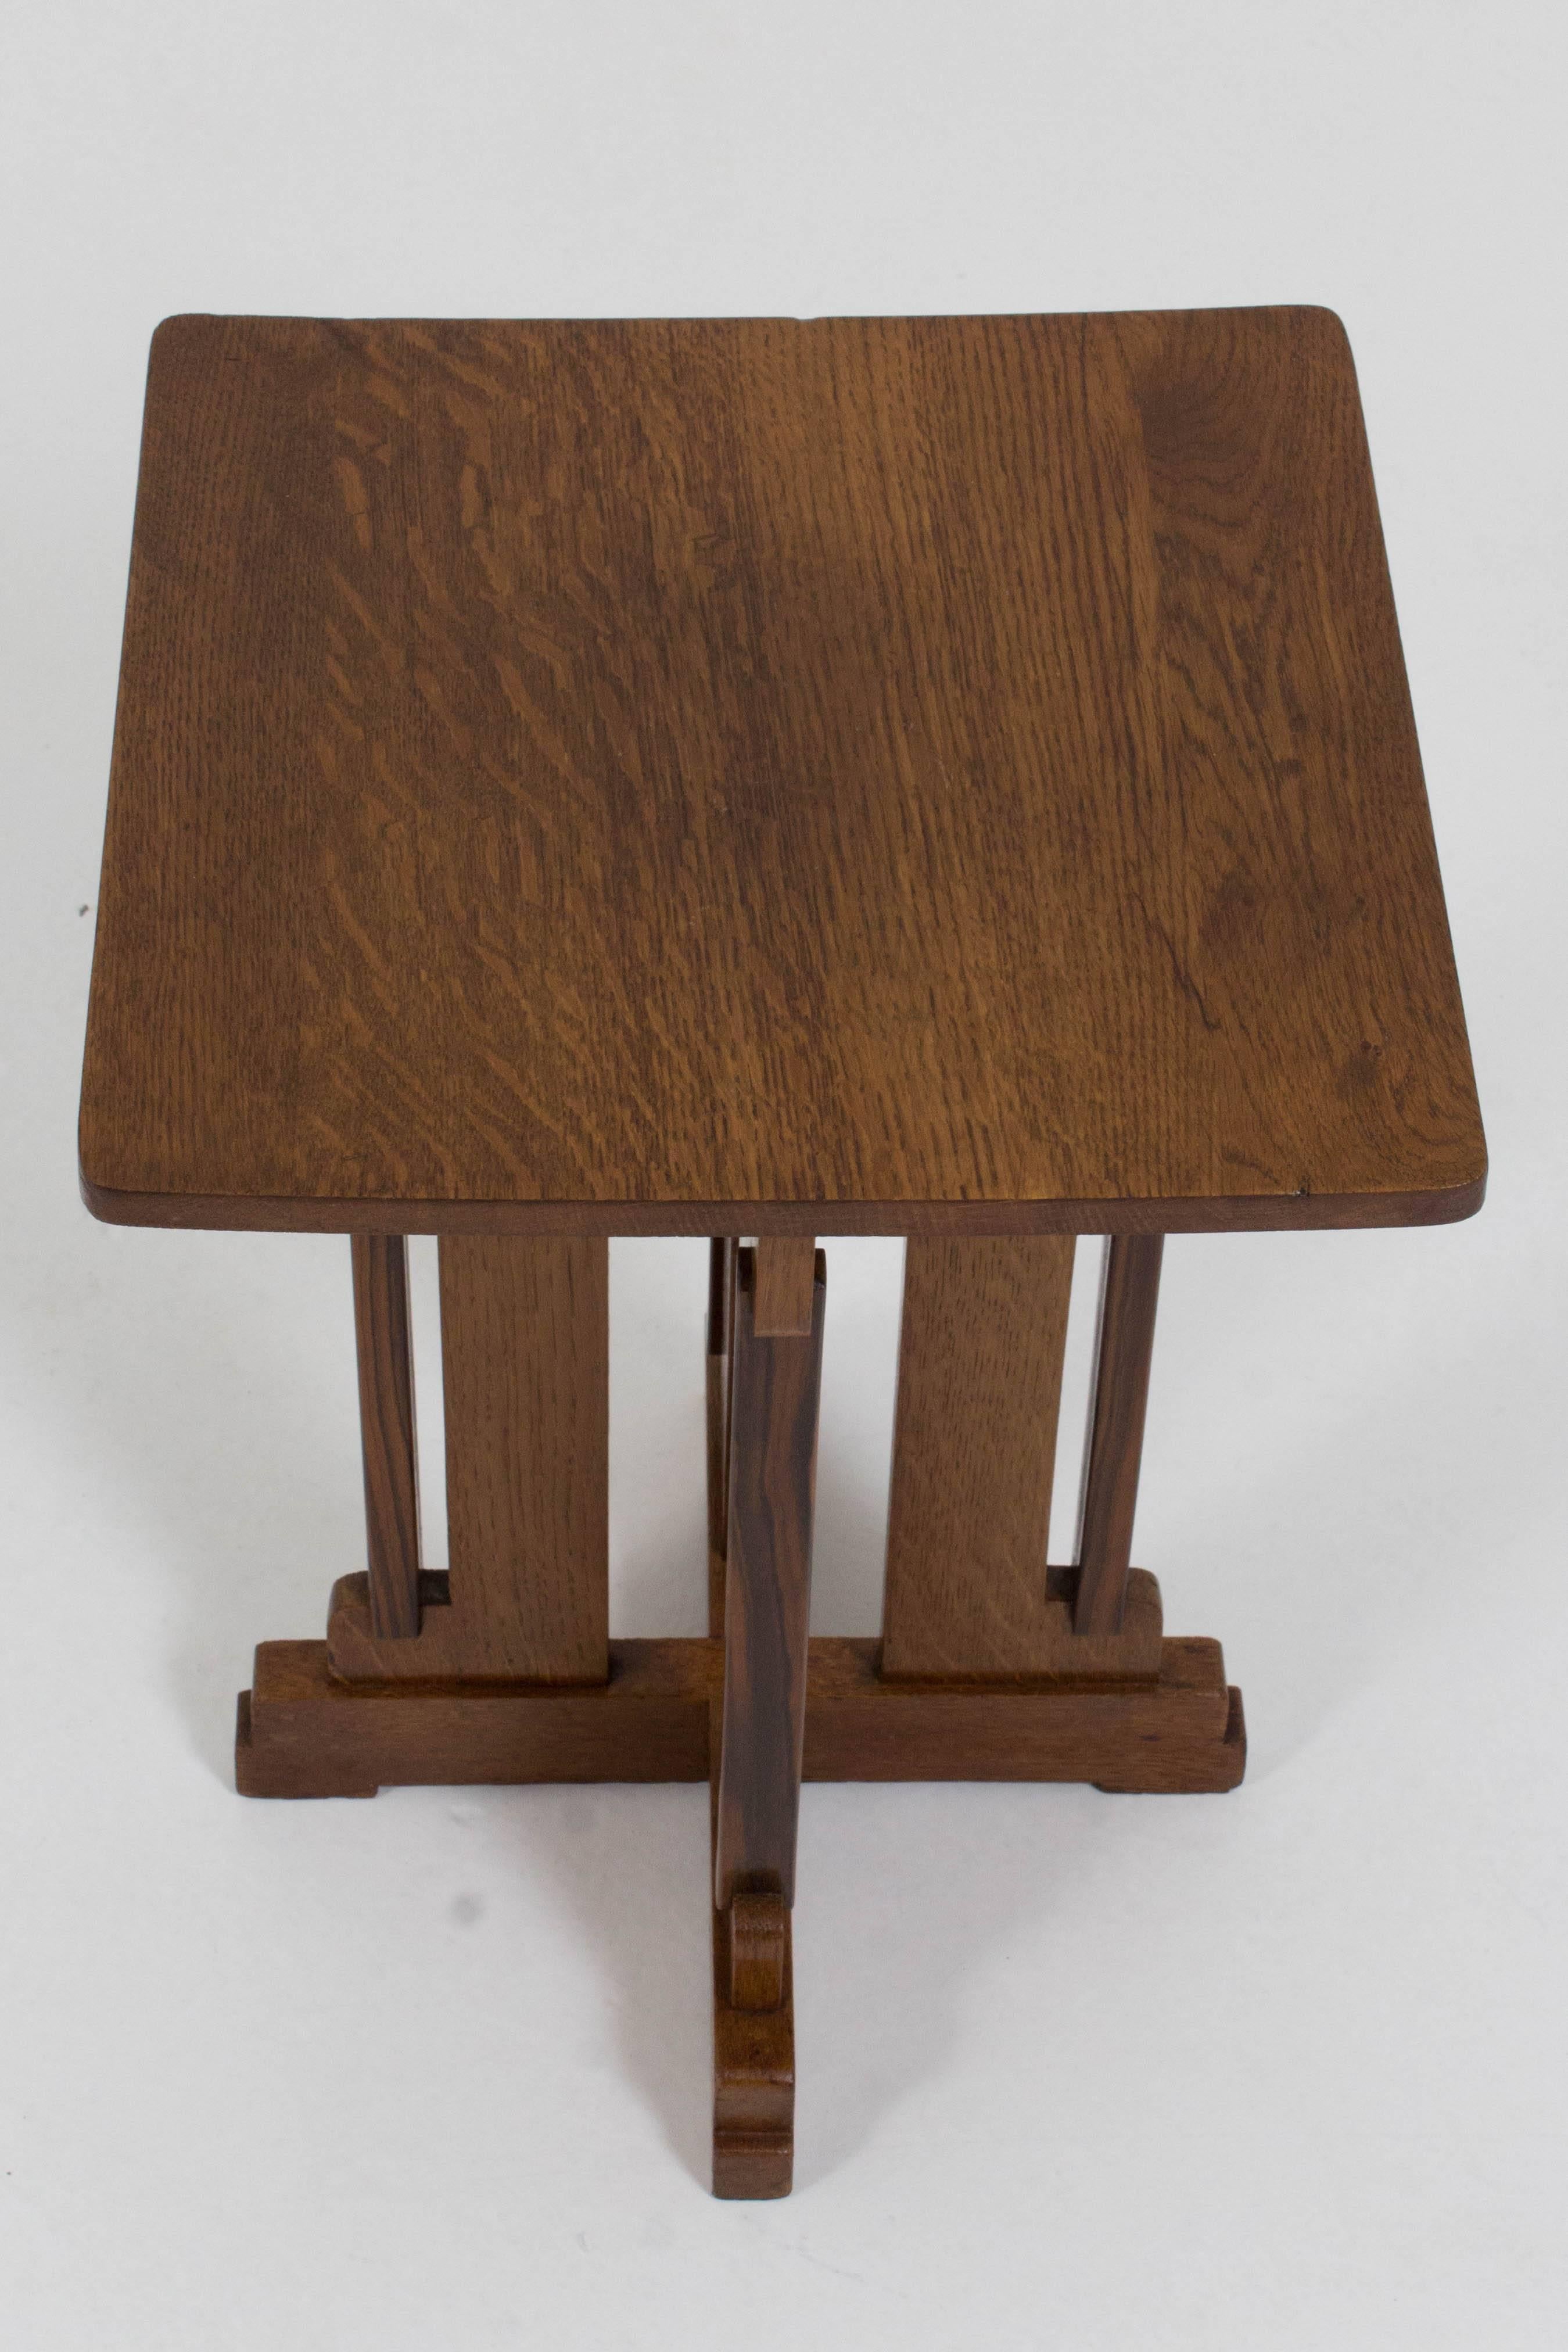 Dutch Stylish Art Deco Haagse School Occasional Table by P.E.L Izeren, 1920s